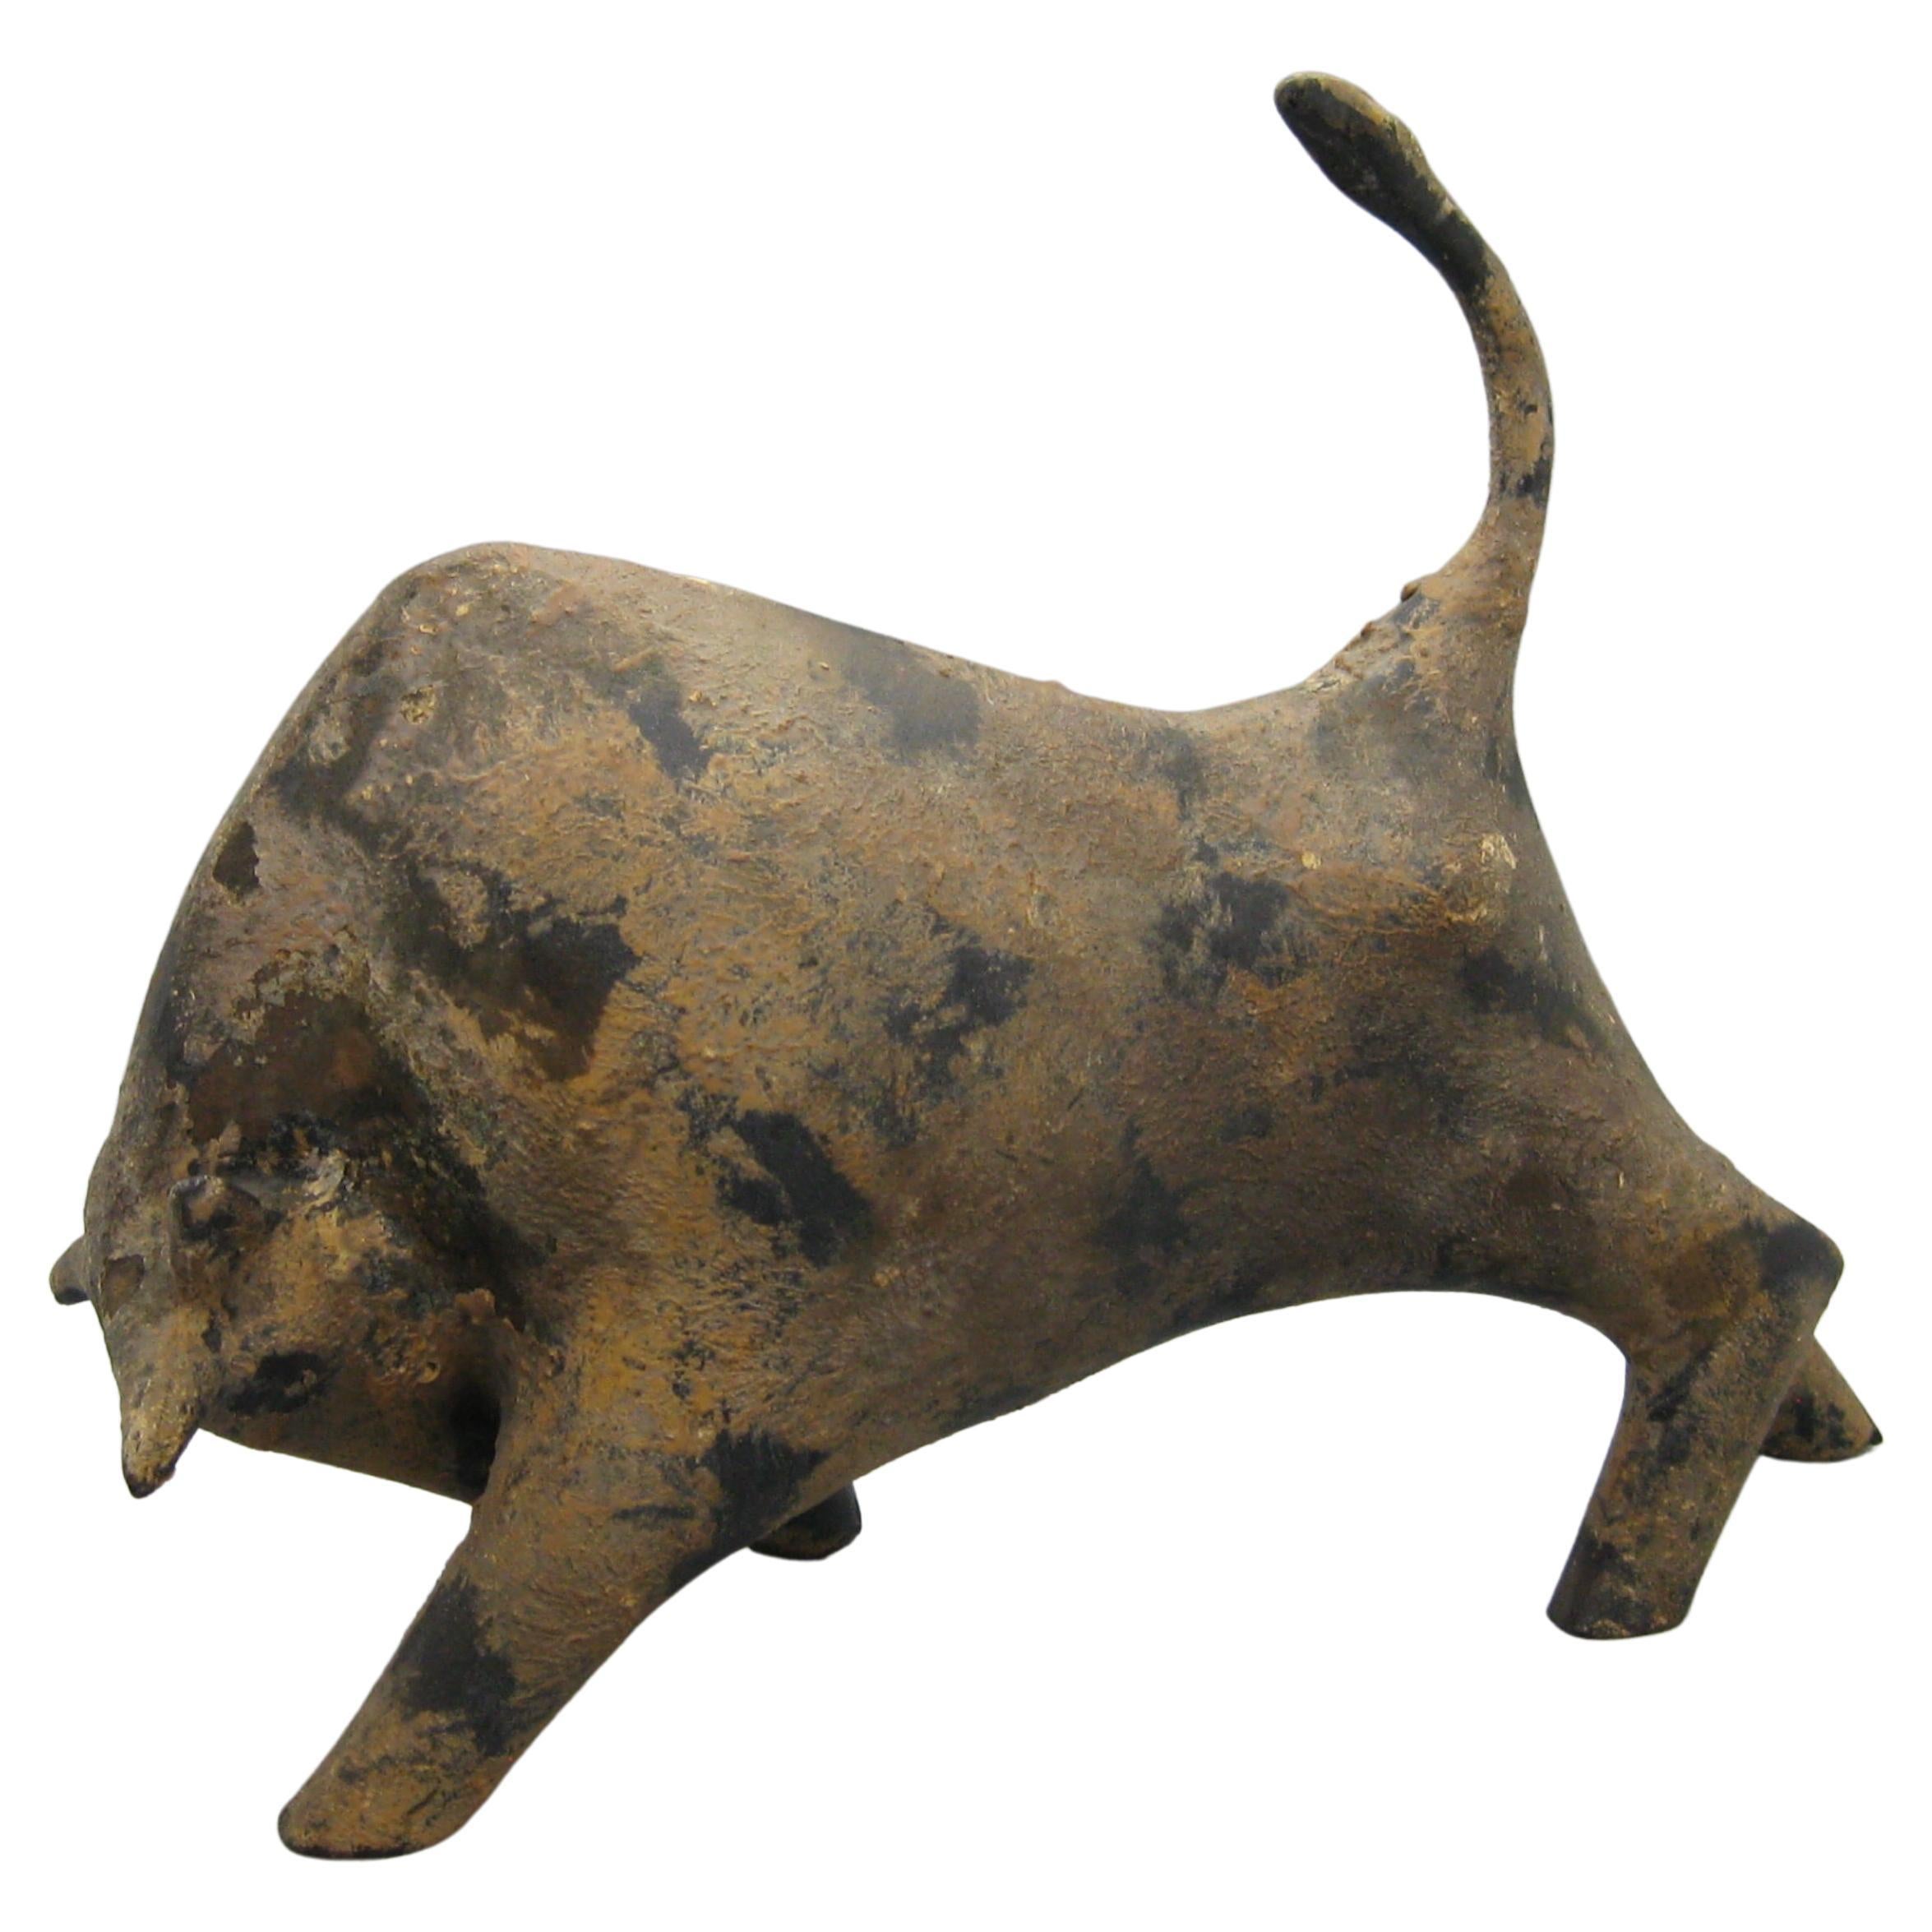 Brutalist Modernist Cast Iron Stylized Bull Sculpture with Patina Finish